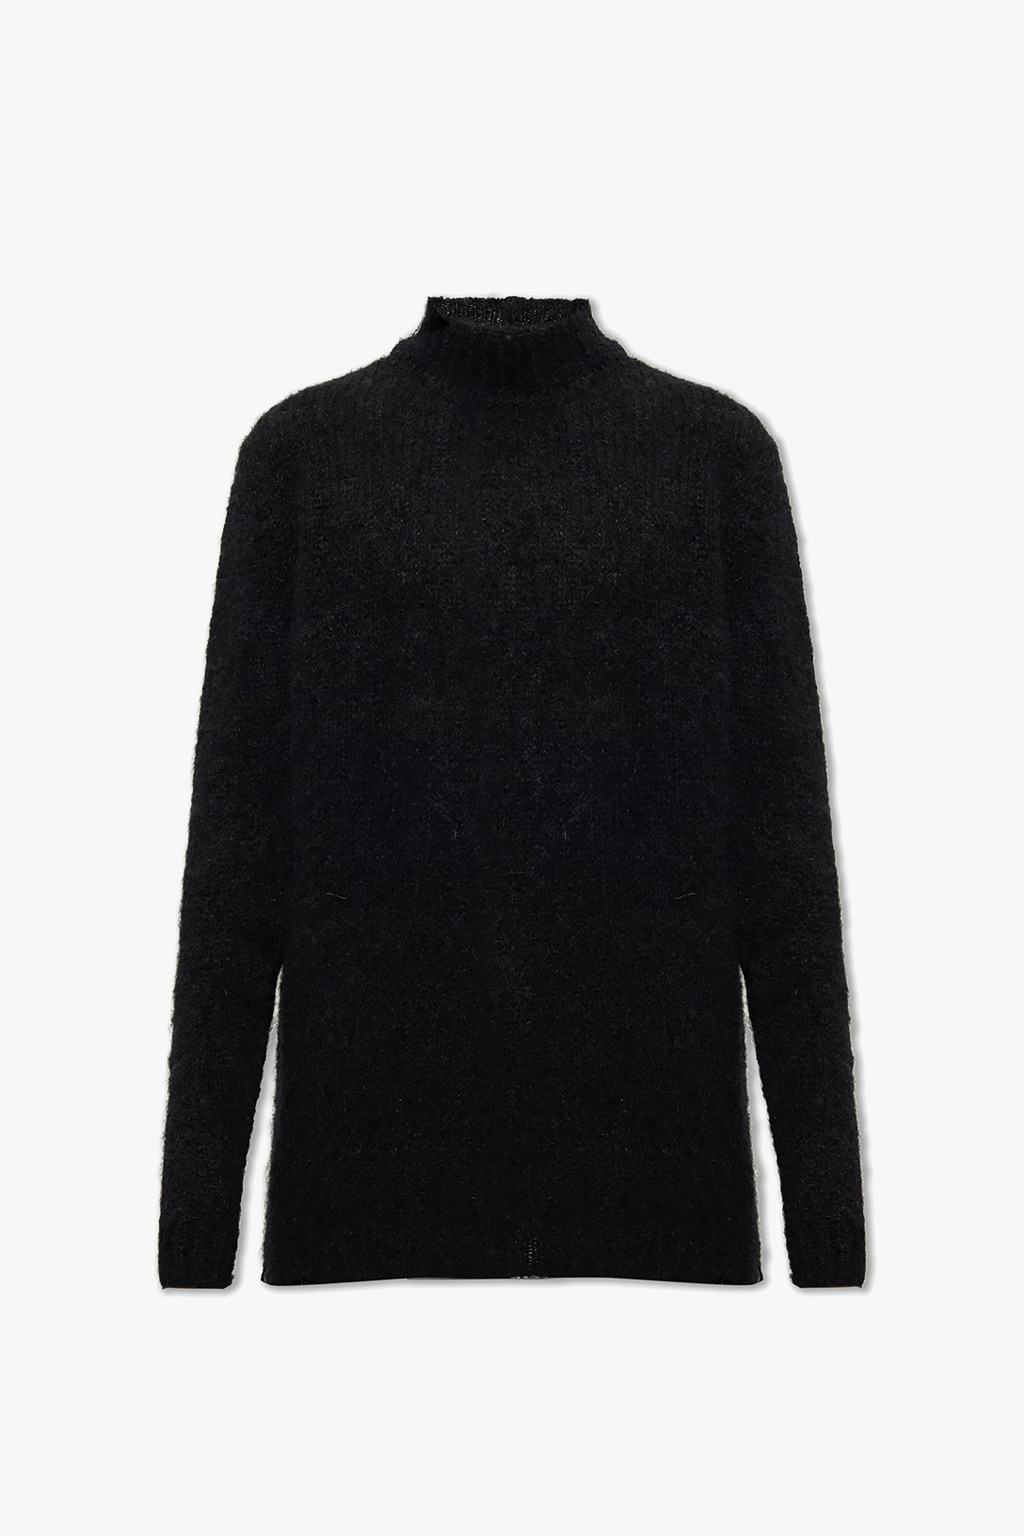 Rick Owens sweater Womens with standing collar